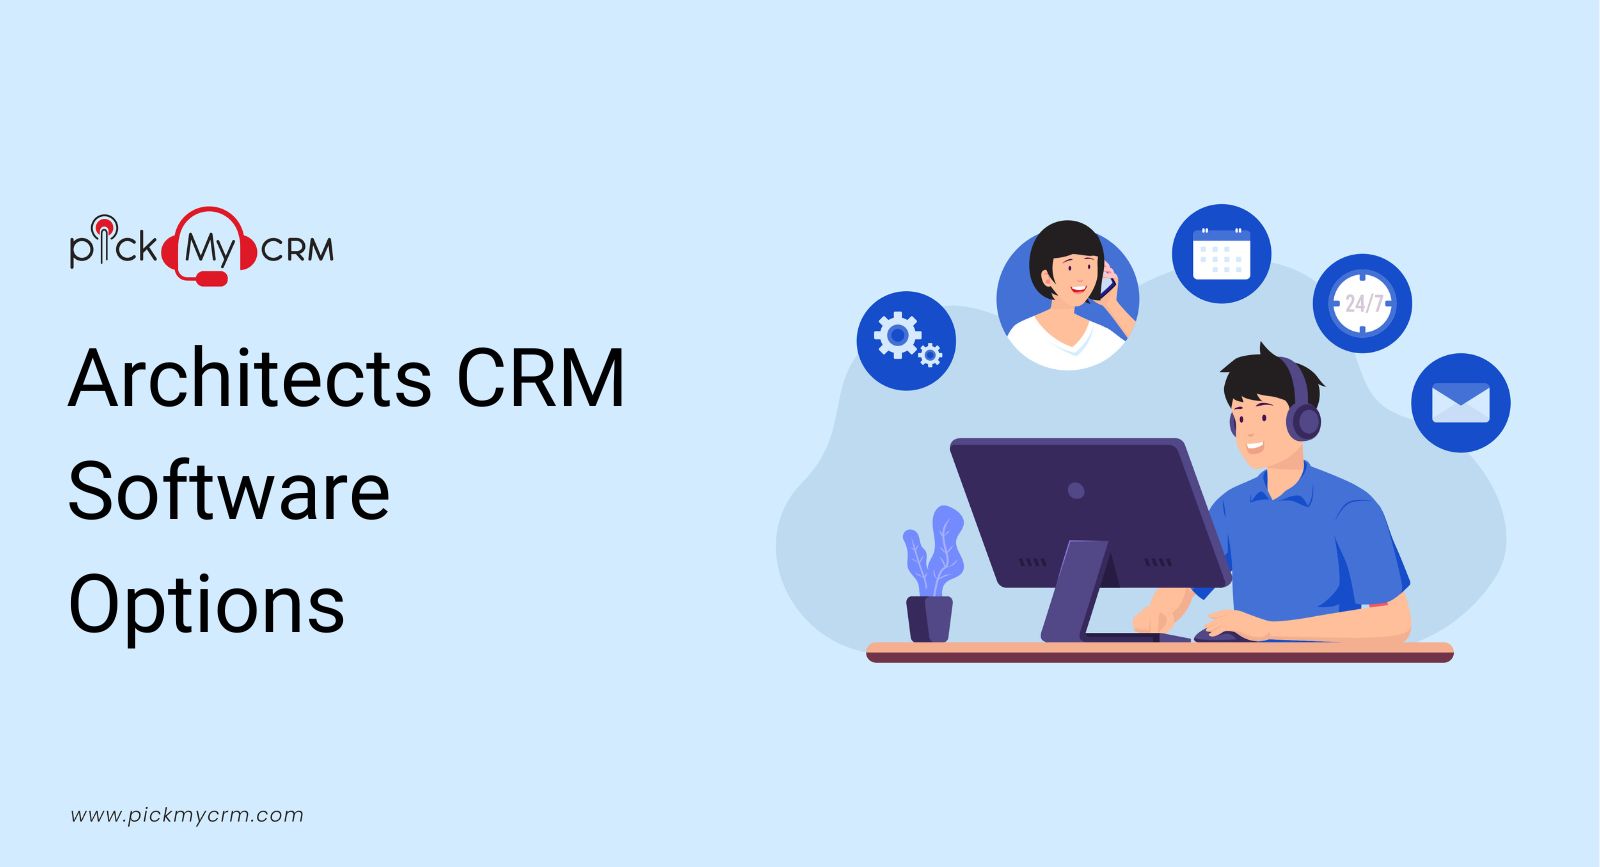 Architects CRM Software Options